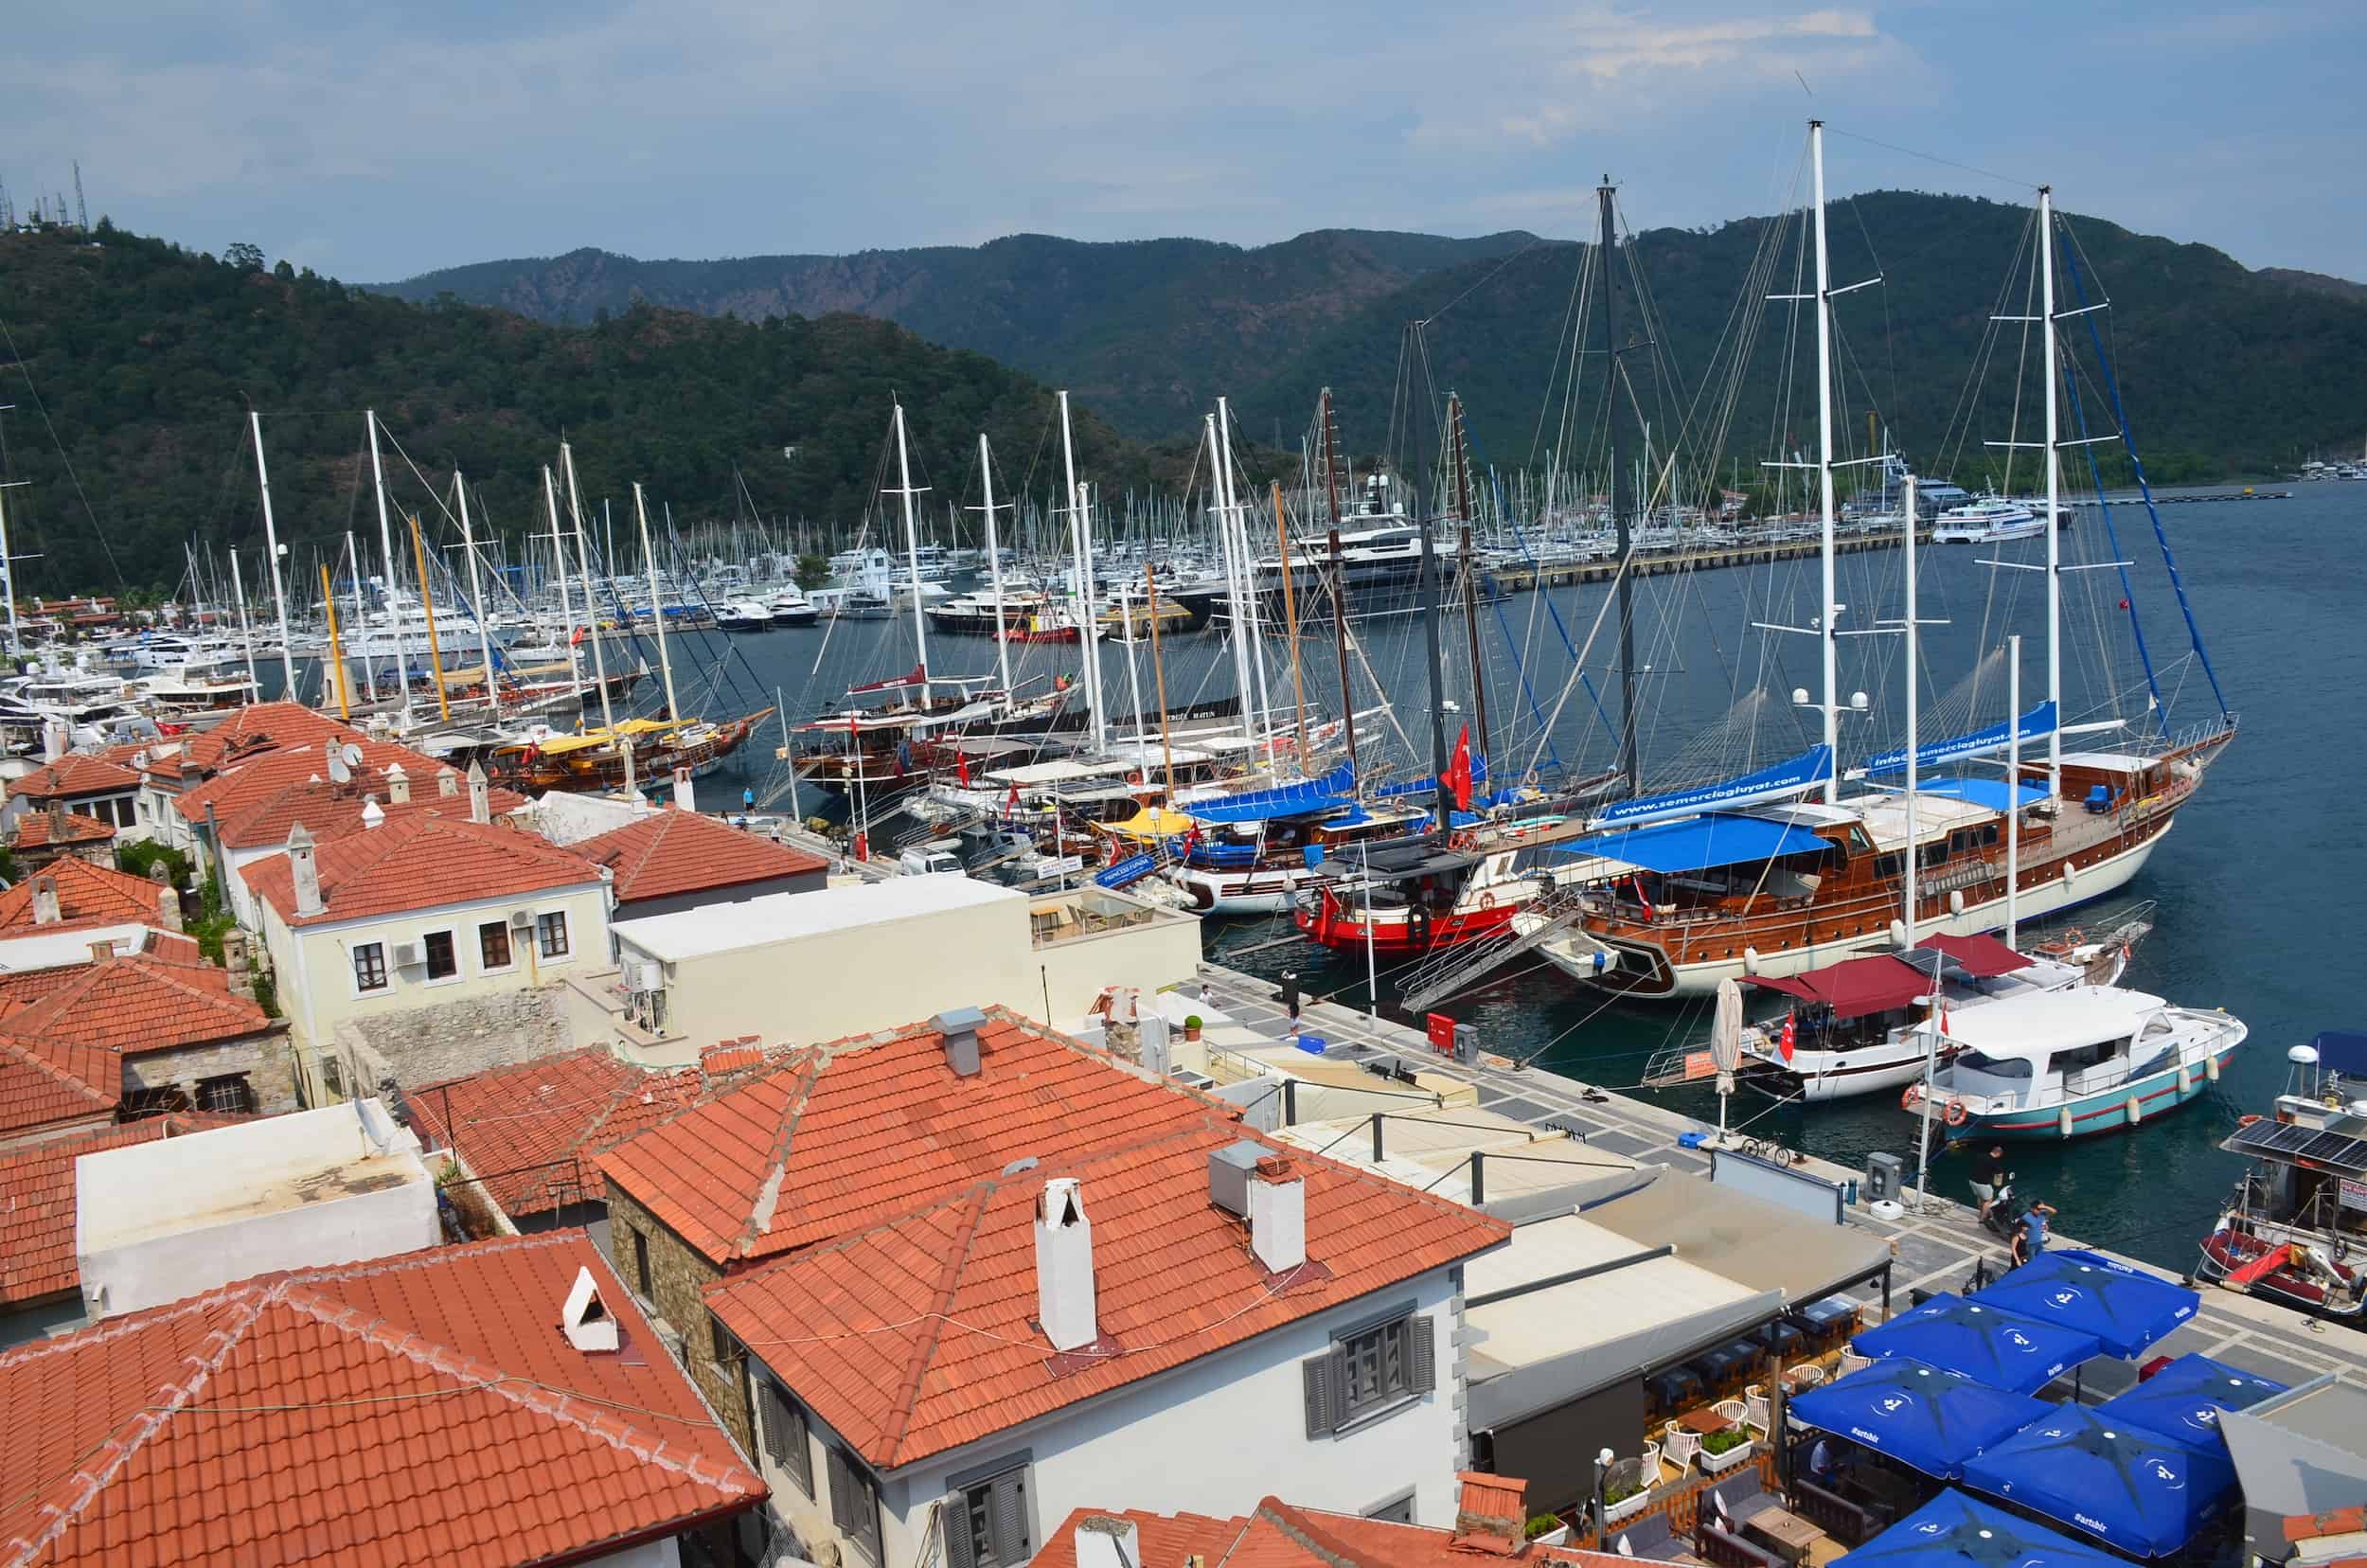 View of the harbor from Marmaris Castle